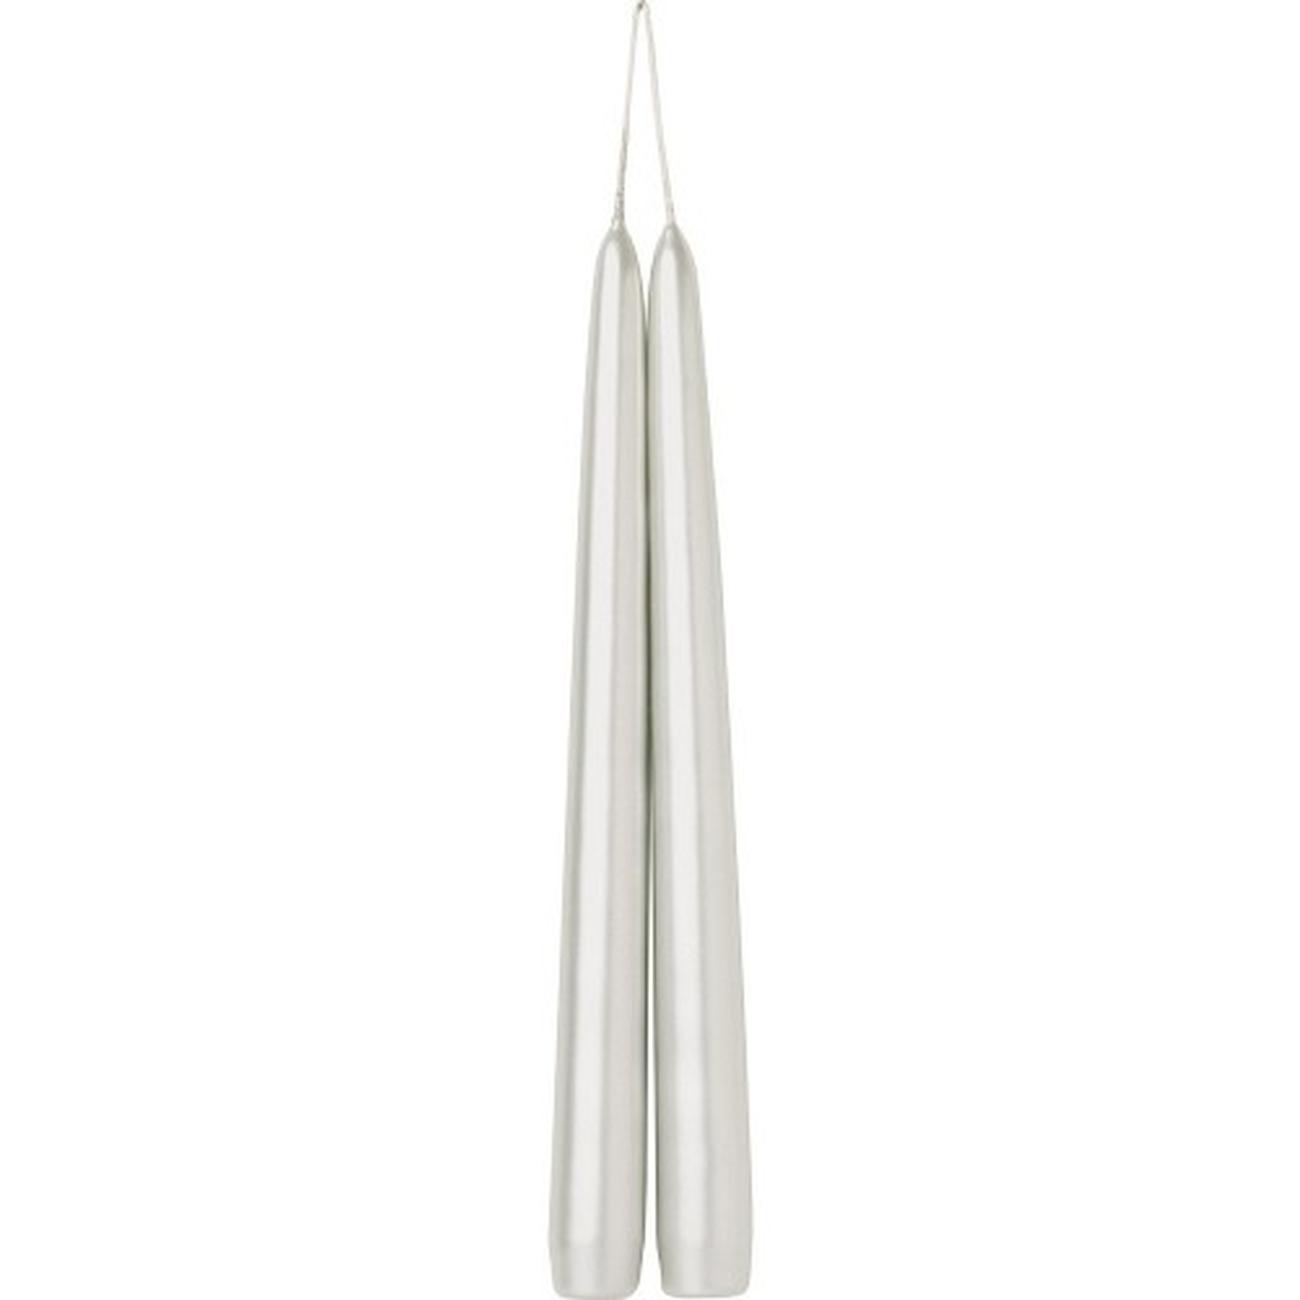 ihr-tapered-dinner-candles-silver - IHR Tapered Candles Silver